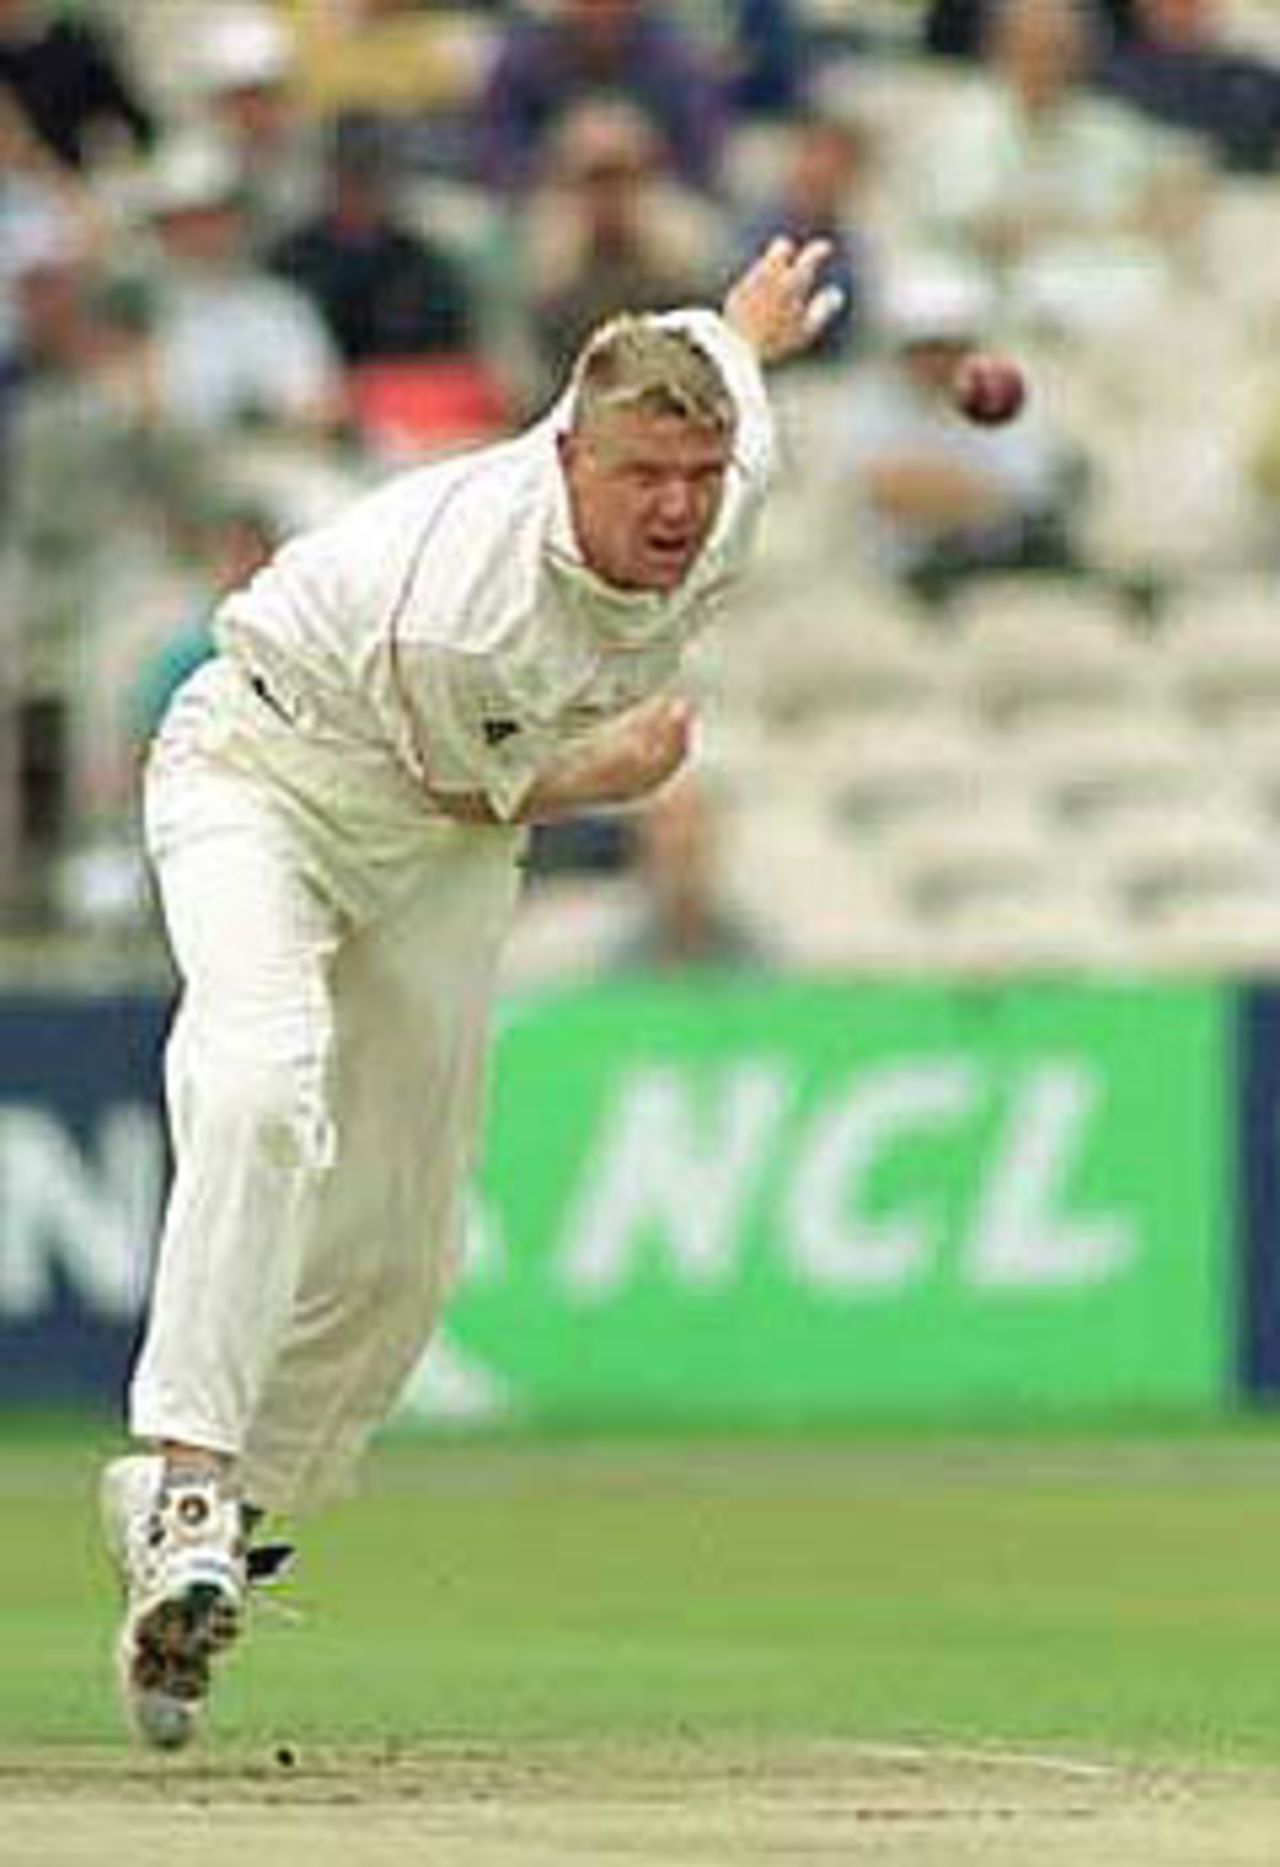 Peter Martin back in action, PPP healthcare County Championship Division One, 2000, Lancashire v Somerset, Old Trafford, Manchester, 08-10 September 2000 (Day 1).